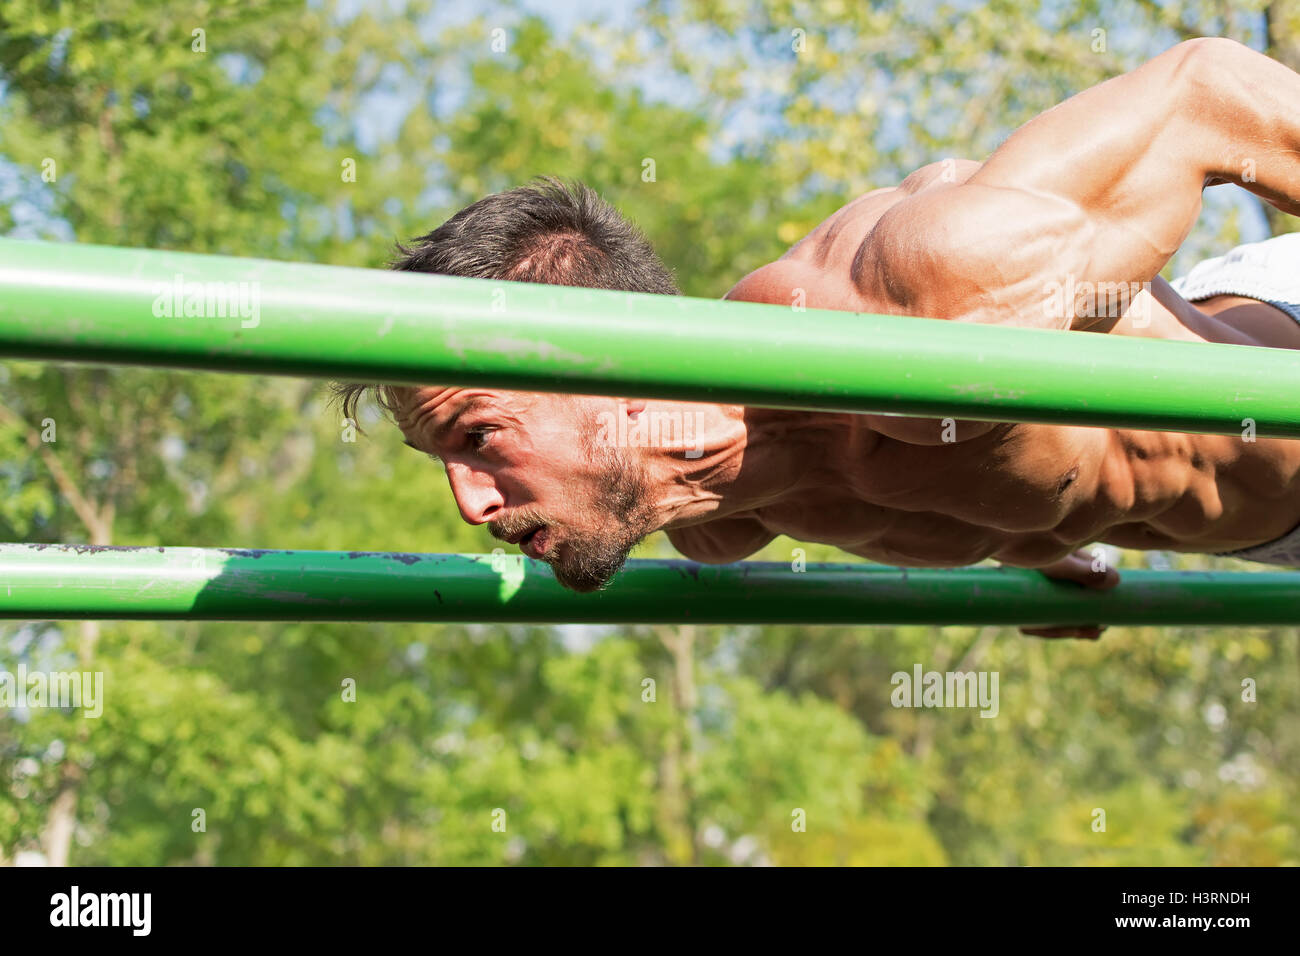 Strong Athletic Man Working Out in an Outdoor Gym. Street Workout Exercises. Tense Muscles. Extreme Sports. Stock Photo